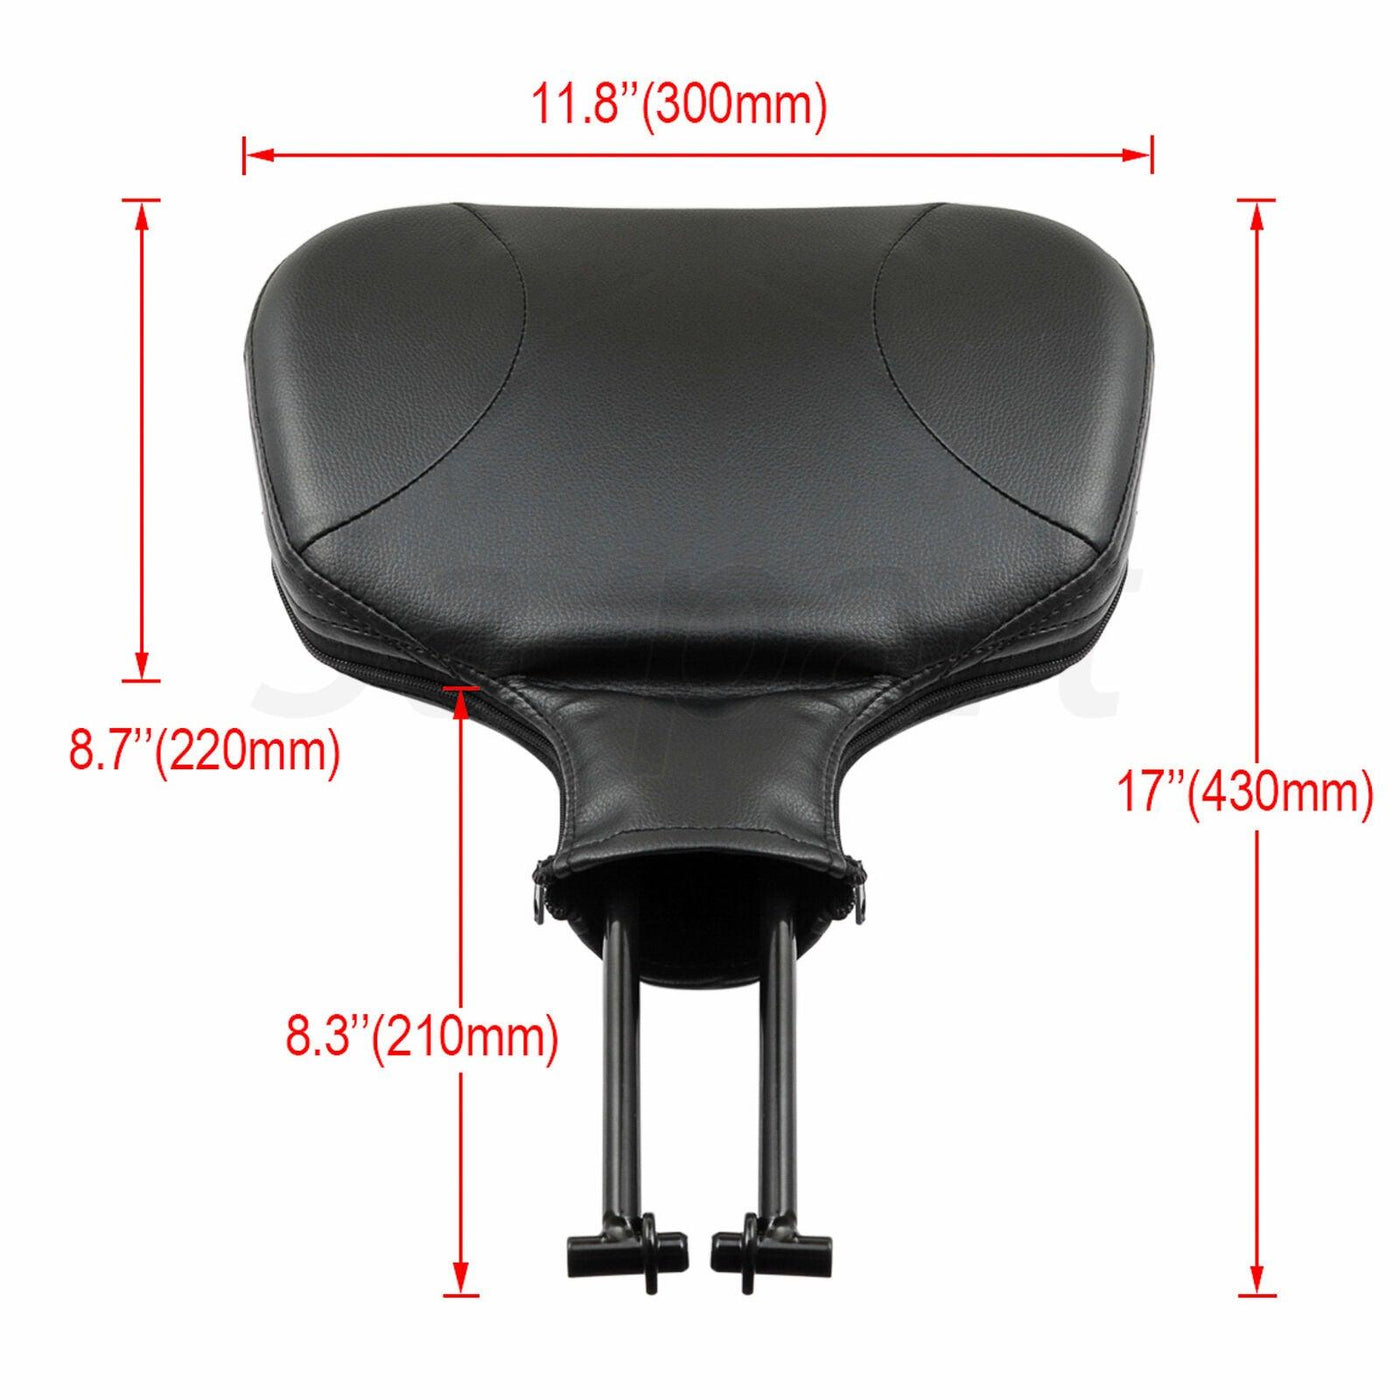 Rear Driver Rider Backrest Fit For Harley Touring Road Electra Glide King 09-22 - Moto Life Products